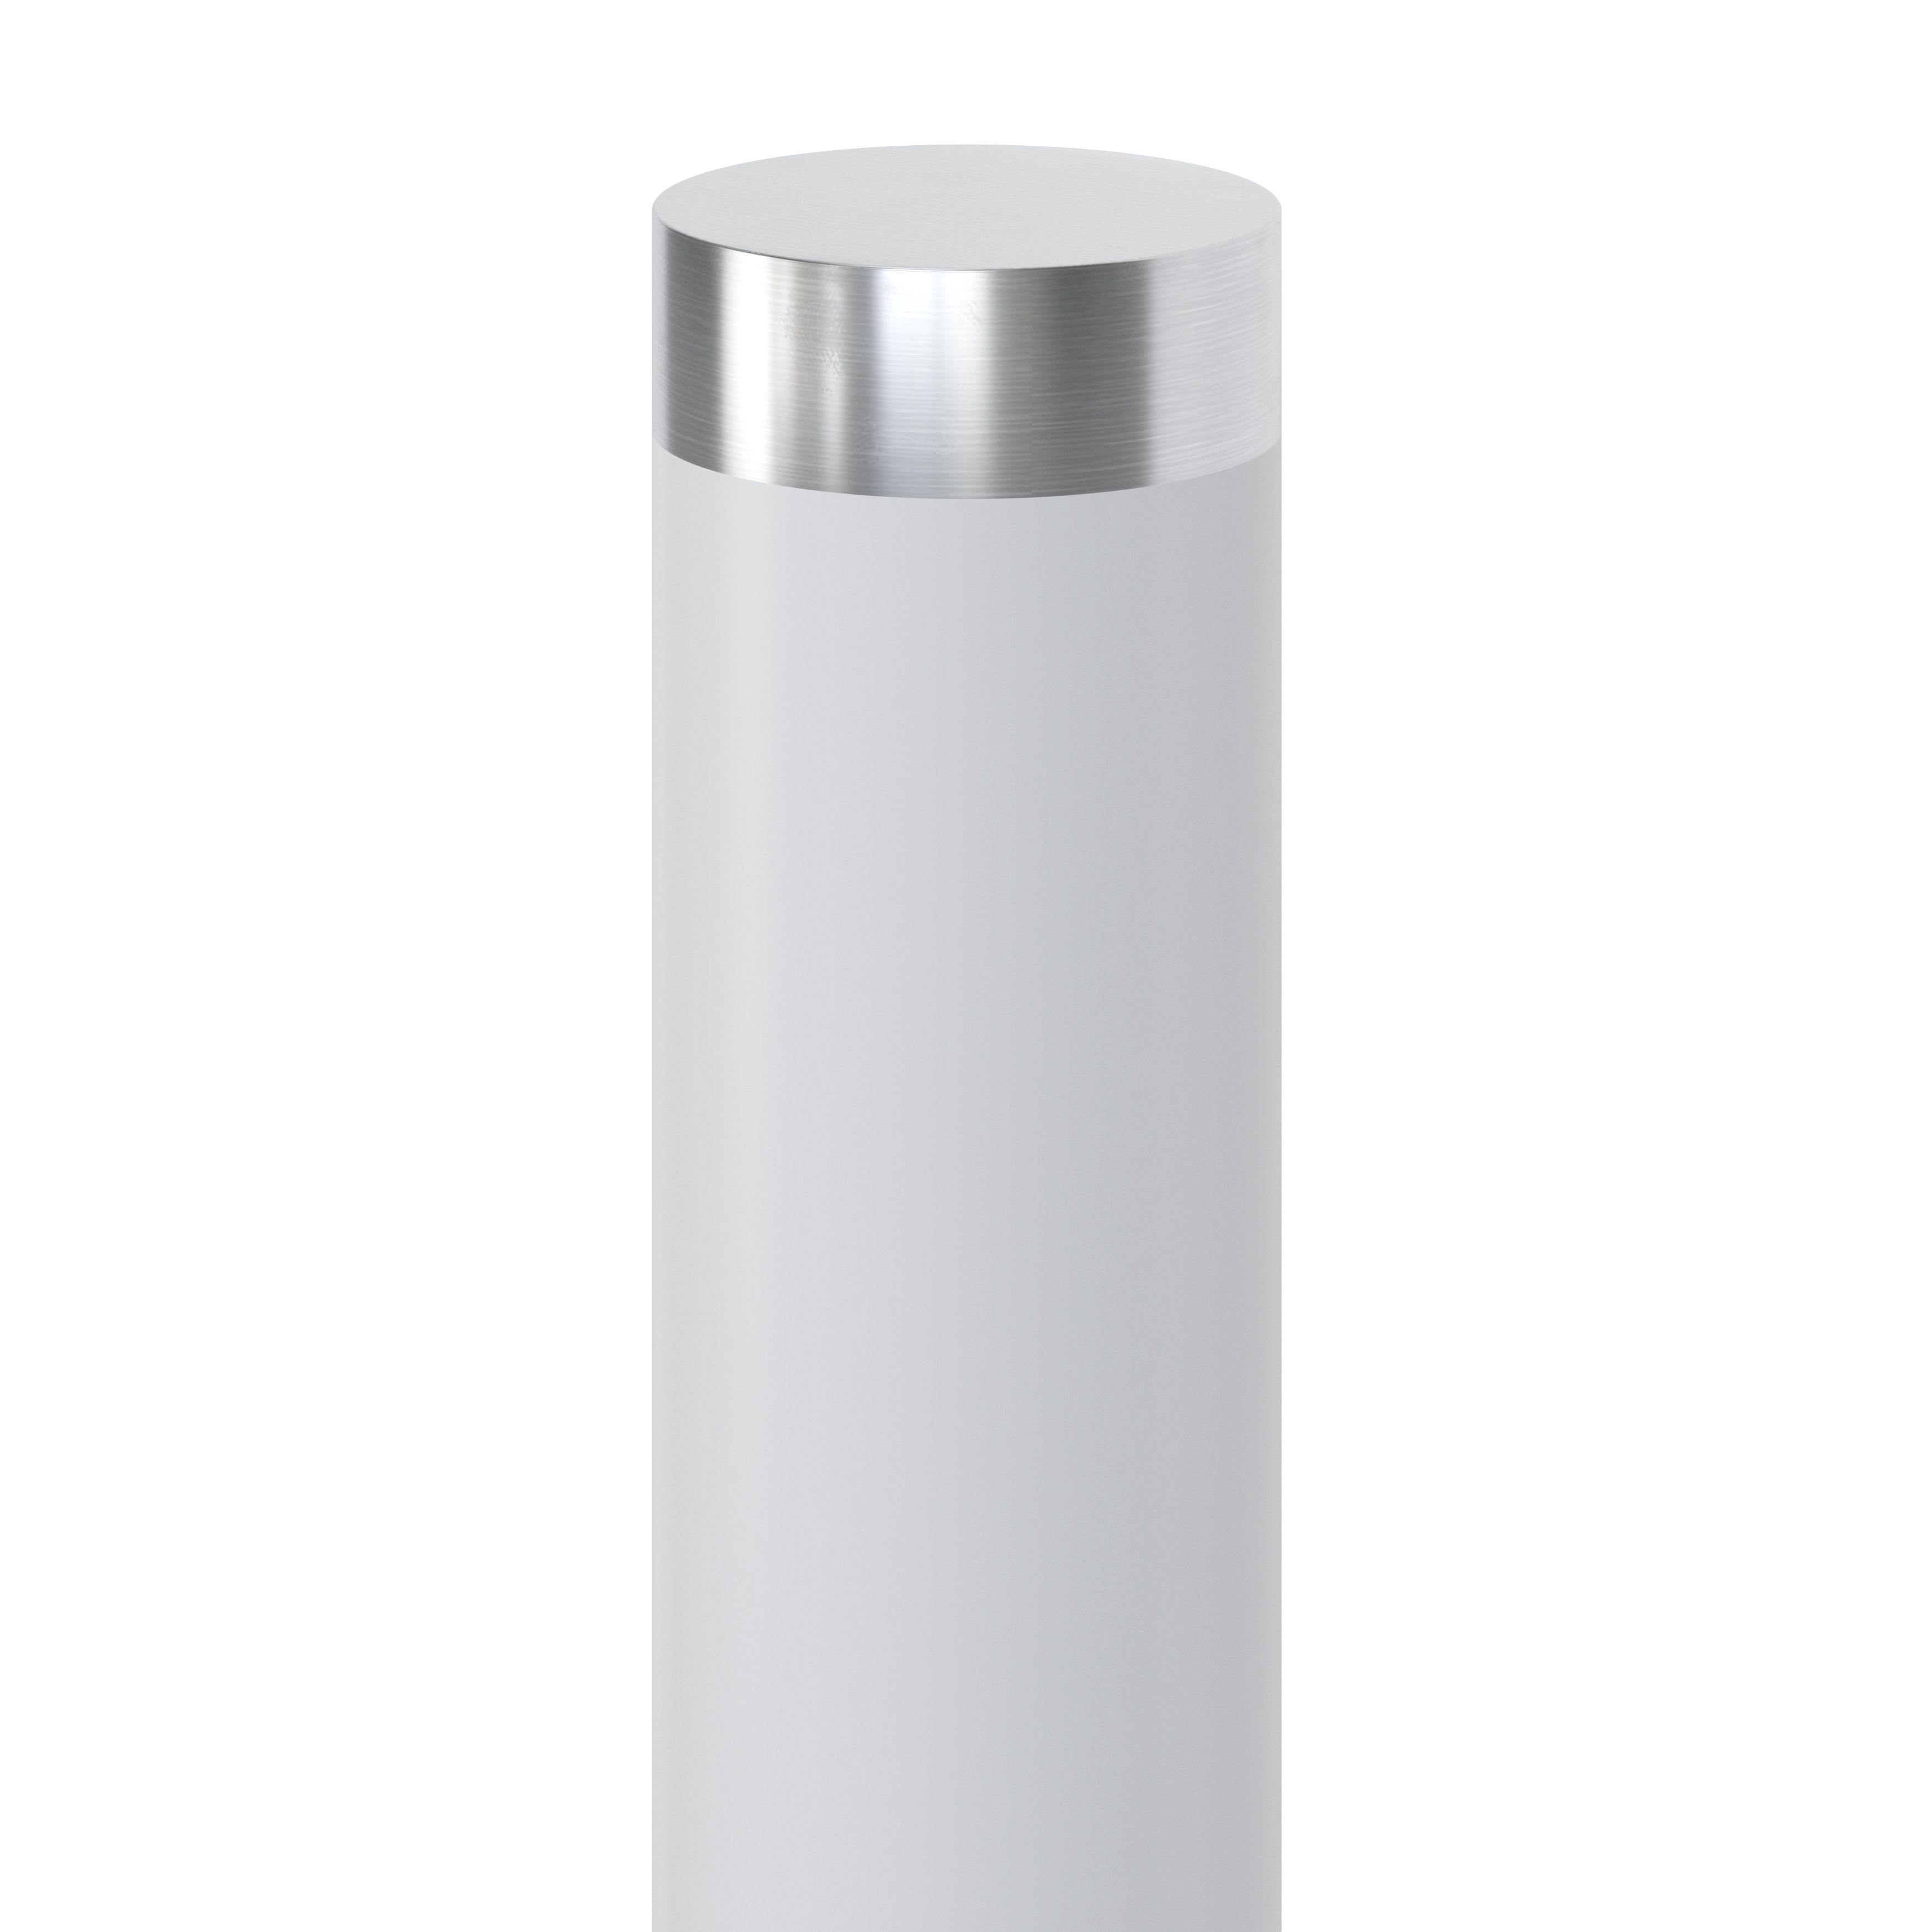 GoodHome Callisto Stainless steel Mains-powered 1 lamp Integrated LED Outdoor Post light (H)480mm